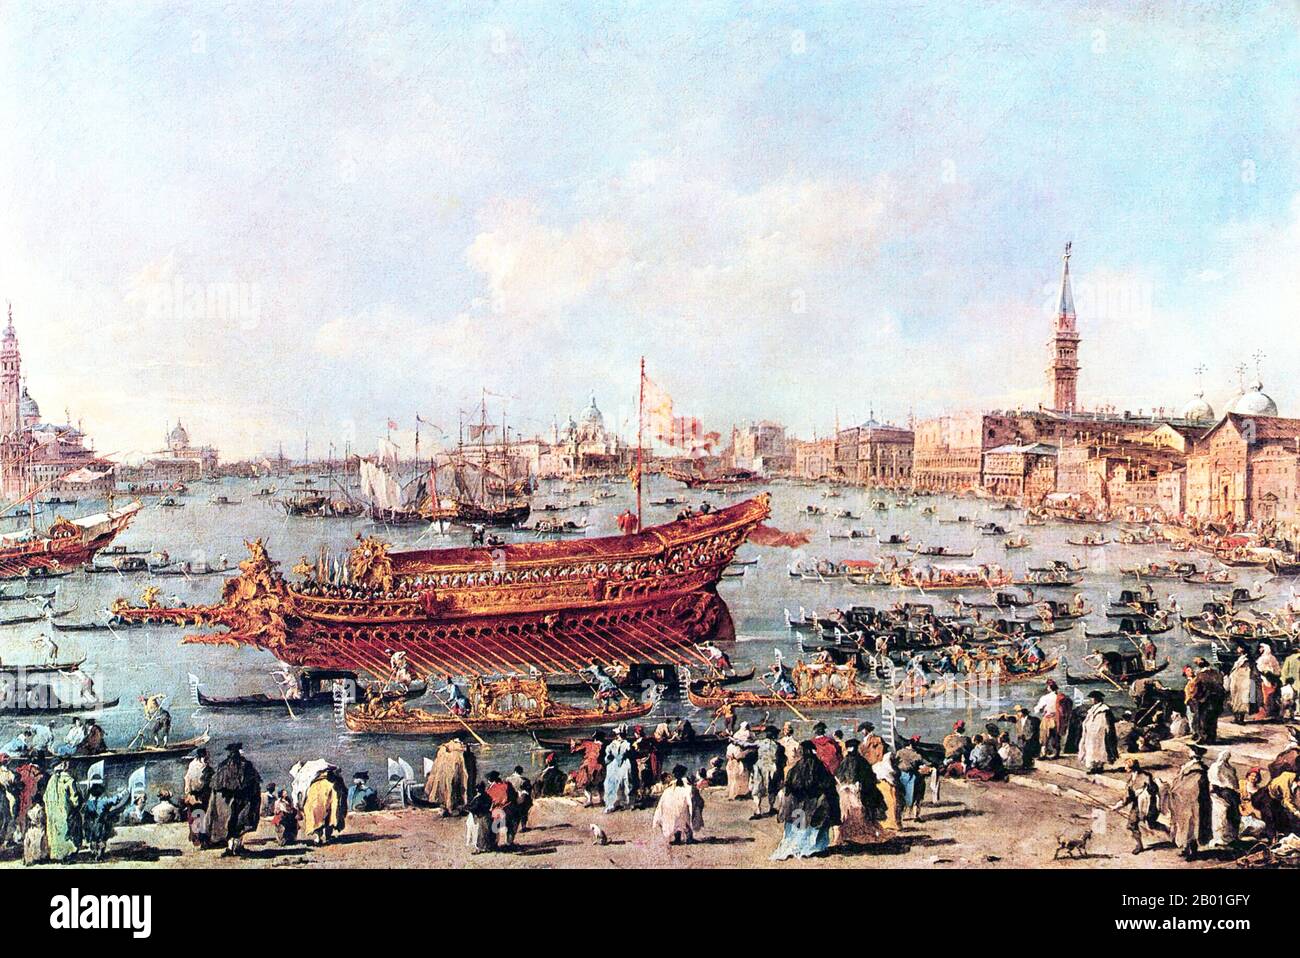 Italy/Venice: 'The Doge on the Bucintoro near the Riva di Sant'Elena'. Oil on canvas painting by Francesco Guardi (5 October 1712 - 1 January 1793), 1775-1780.  For centuries Venice was Europe’s prime trading partner with the Middle East and the Byzantine Empire in particular. Venetian naval and commercial power was unrivalled in Europe until it lost a series of wars to the Ottoman armies in the 15th century. The city lost some 50,000 people to the Black Death in 1575-1577, but remained a major manufacturing centre and port well into the 18th century. Stock Photo